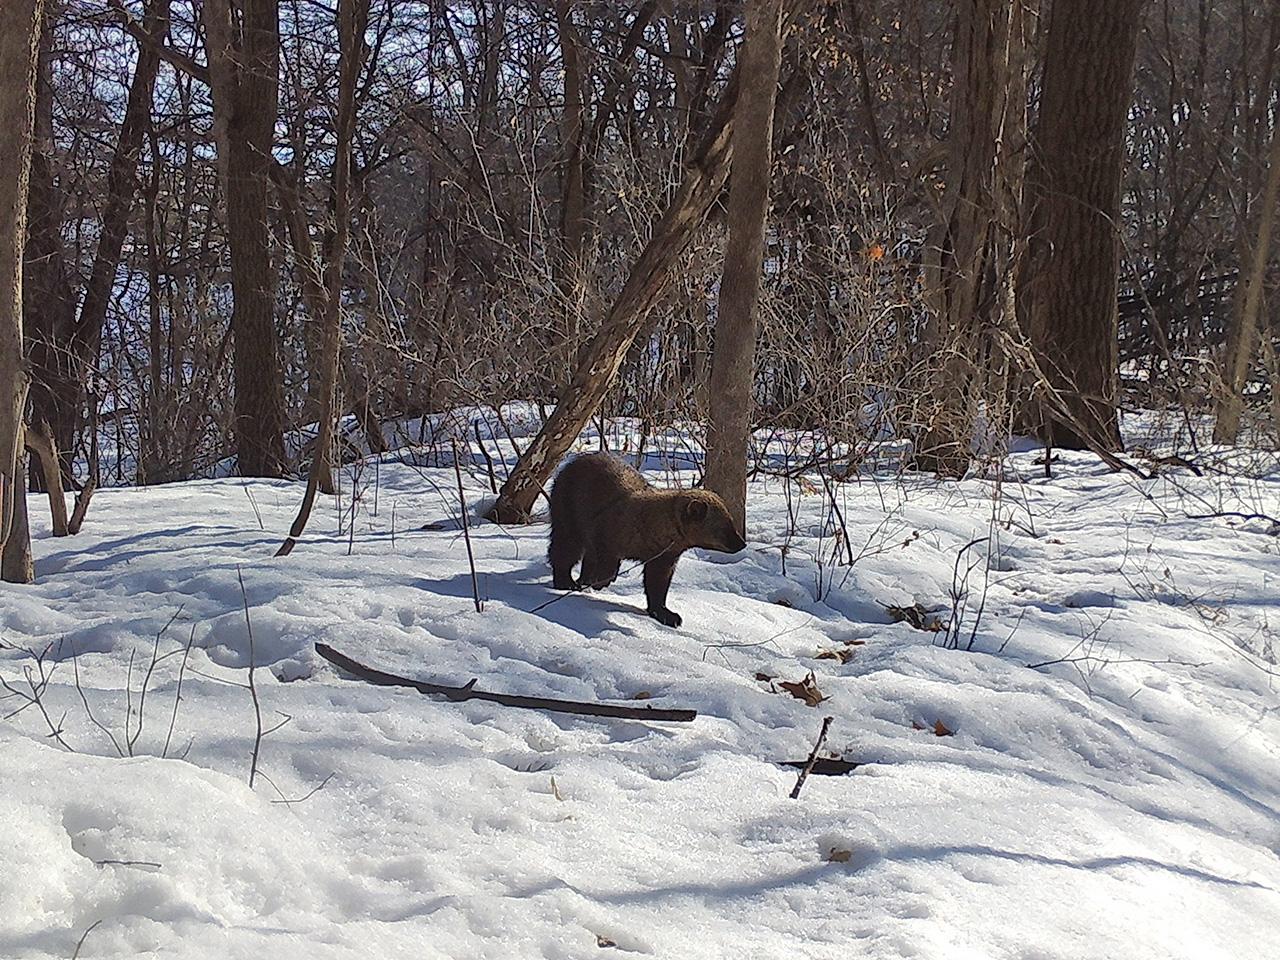 A small brown weasel like animal walking in a snowy forest. 